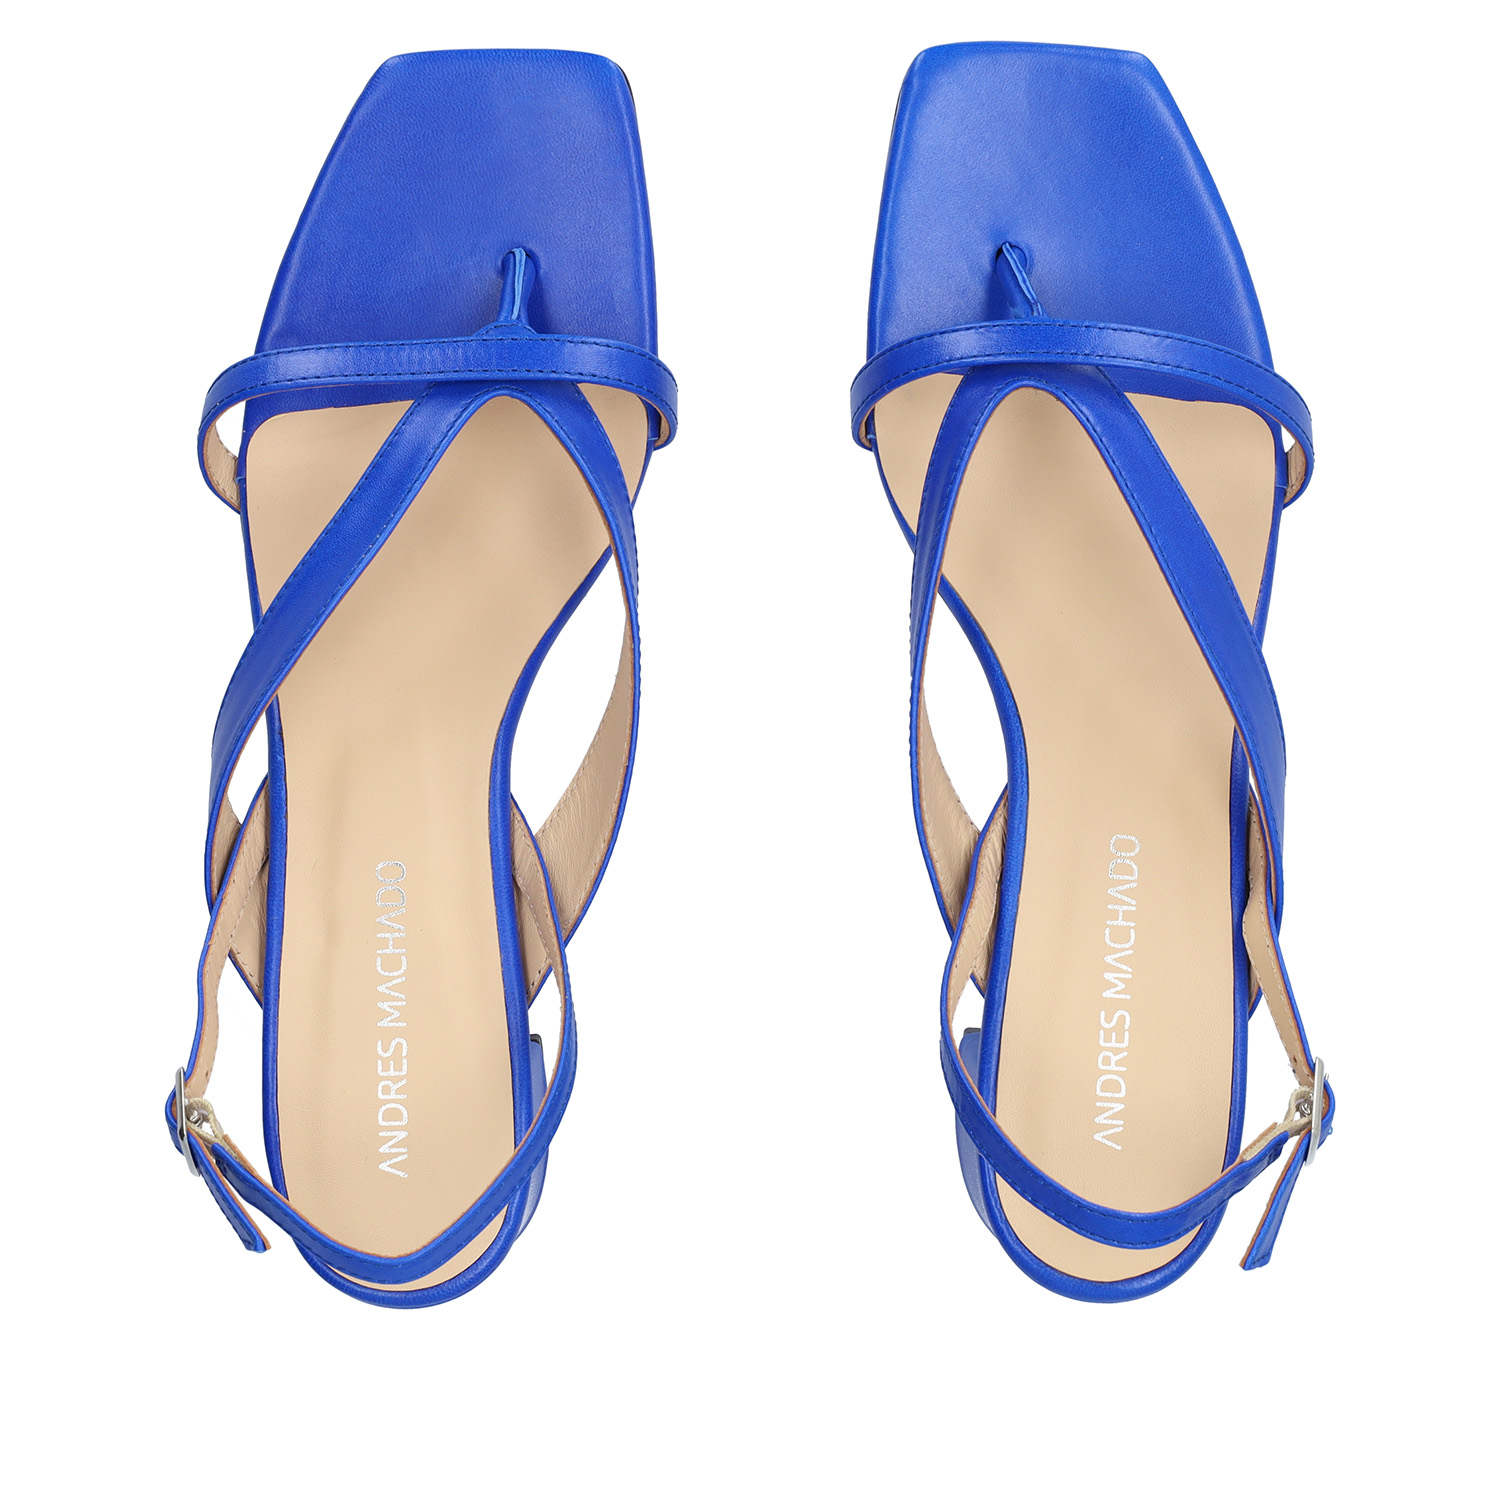 Heeled sandals in blue leather 